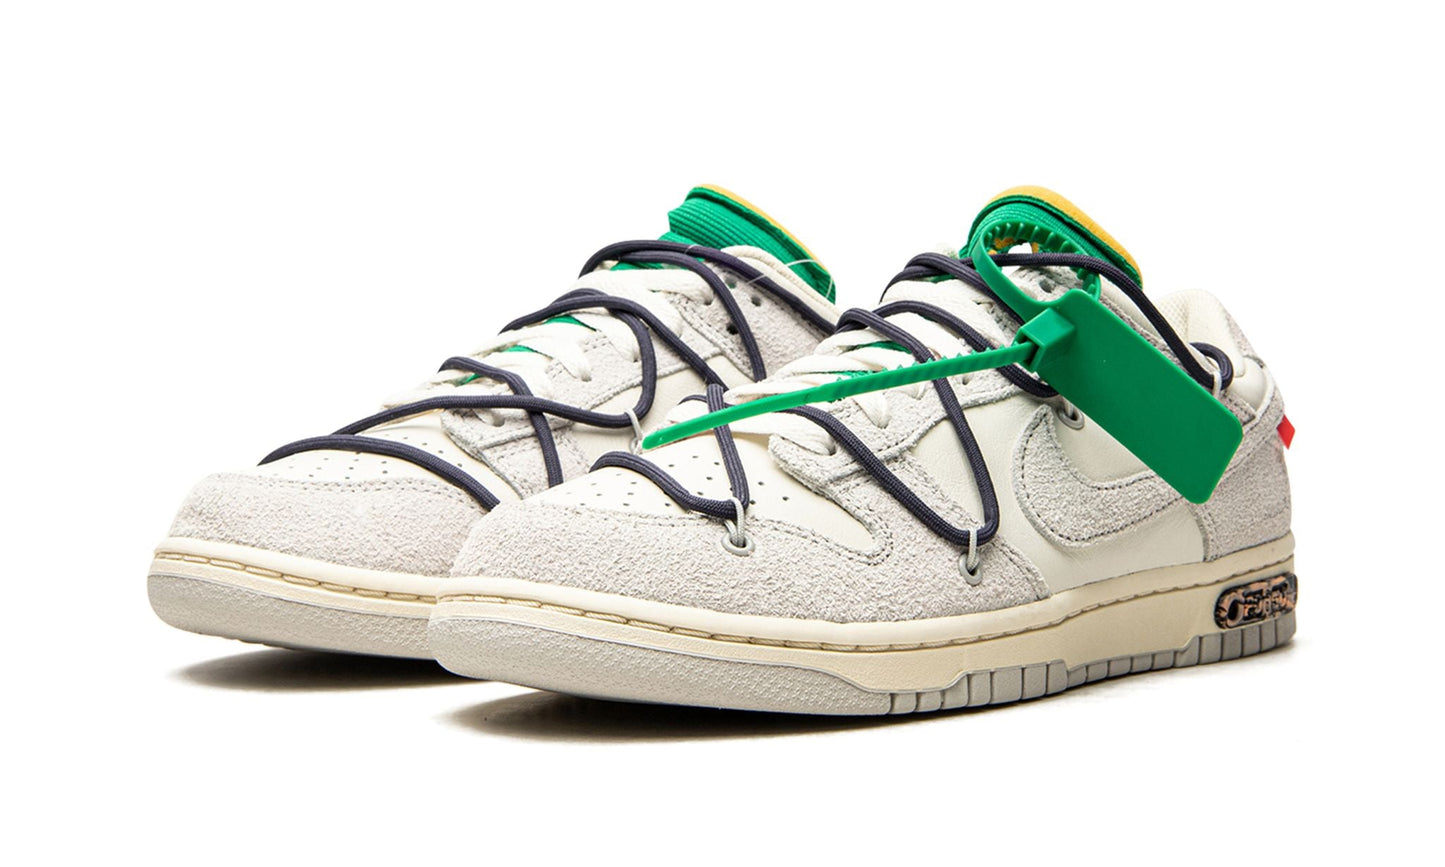 NIKE X OFF-WHITE DUNK LOW "Off-White - Lot 20"